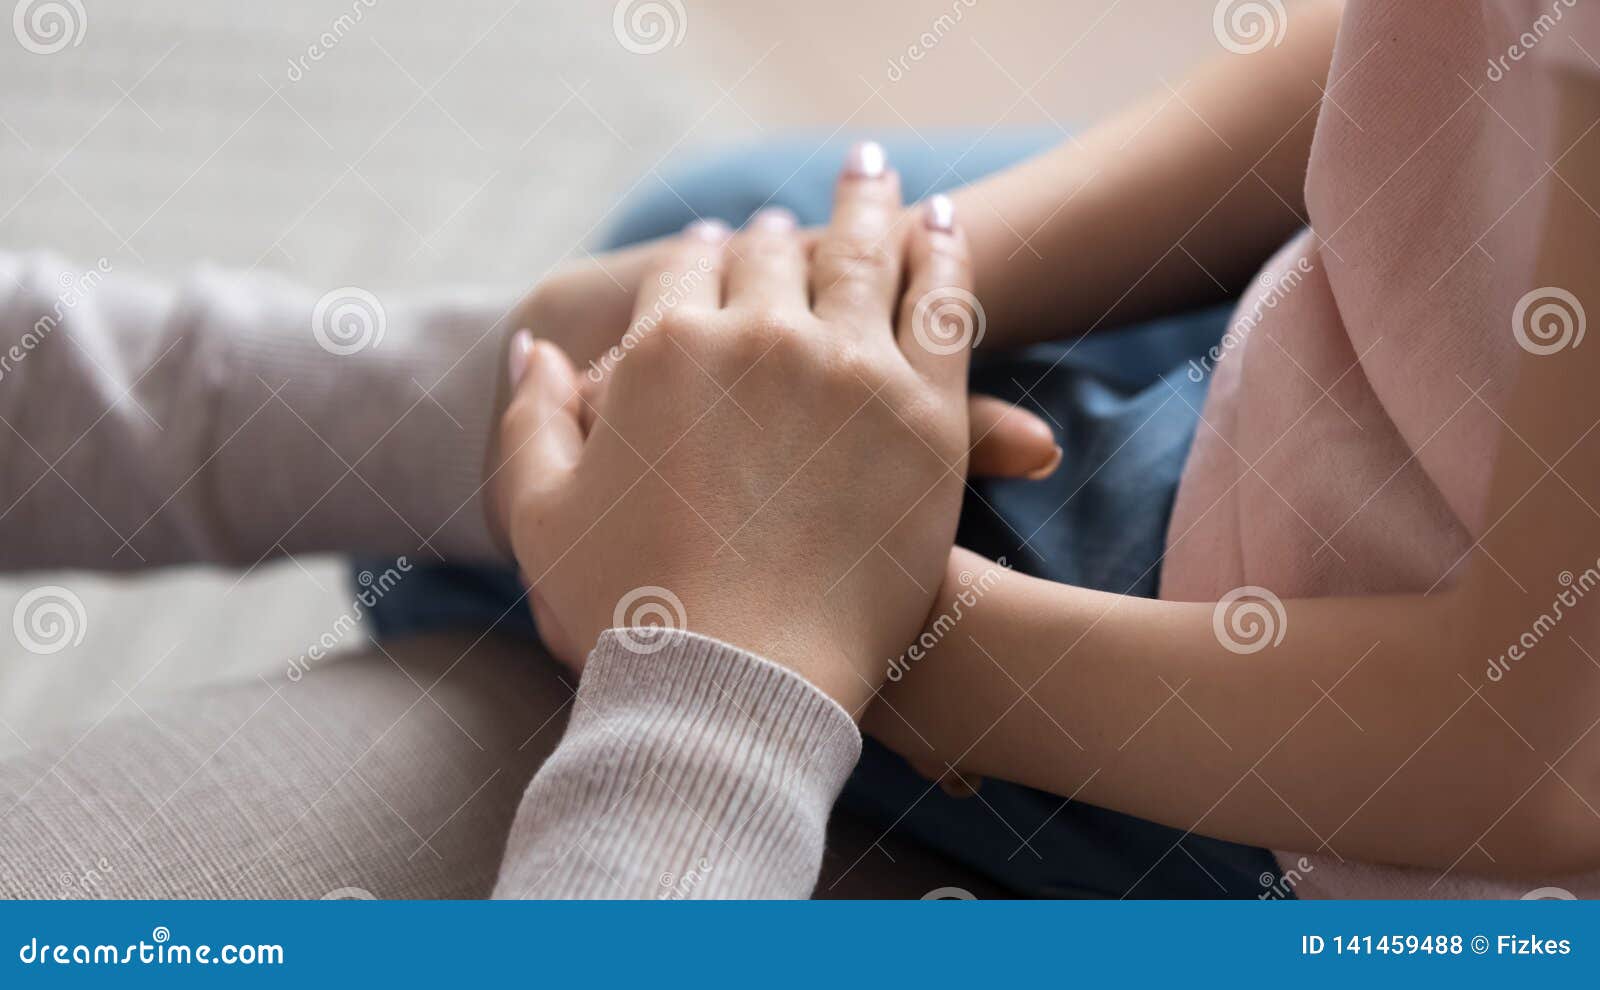 mom giving support trust to little daughter holding hands, closeup